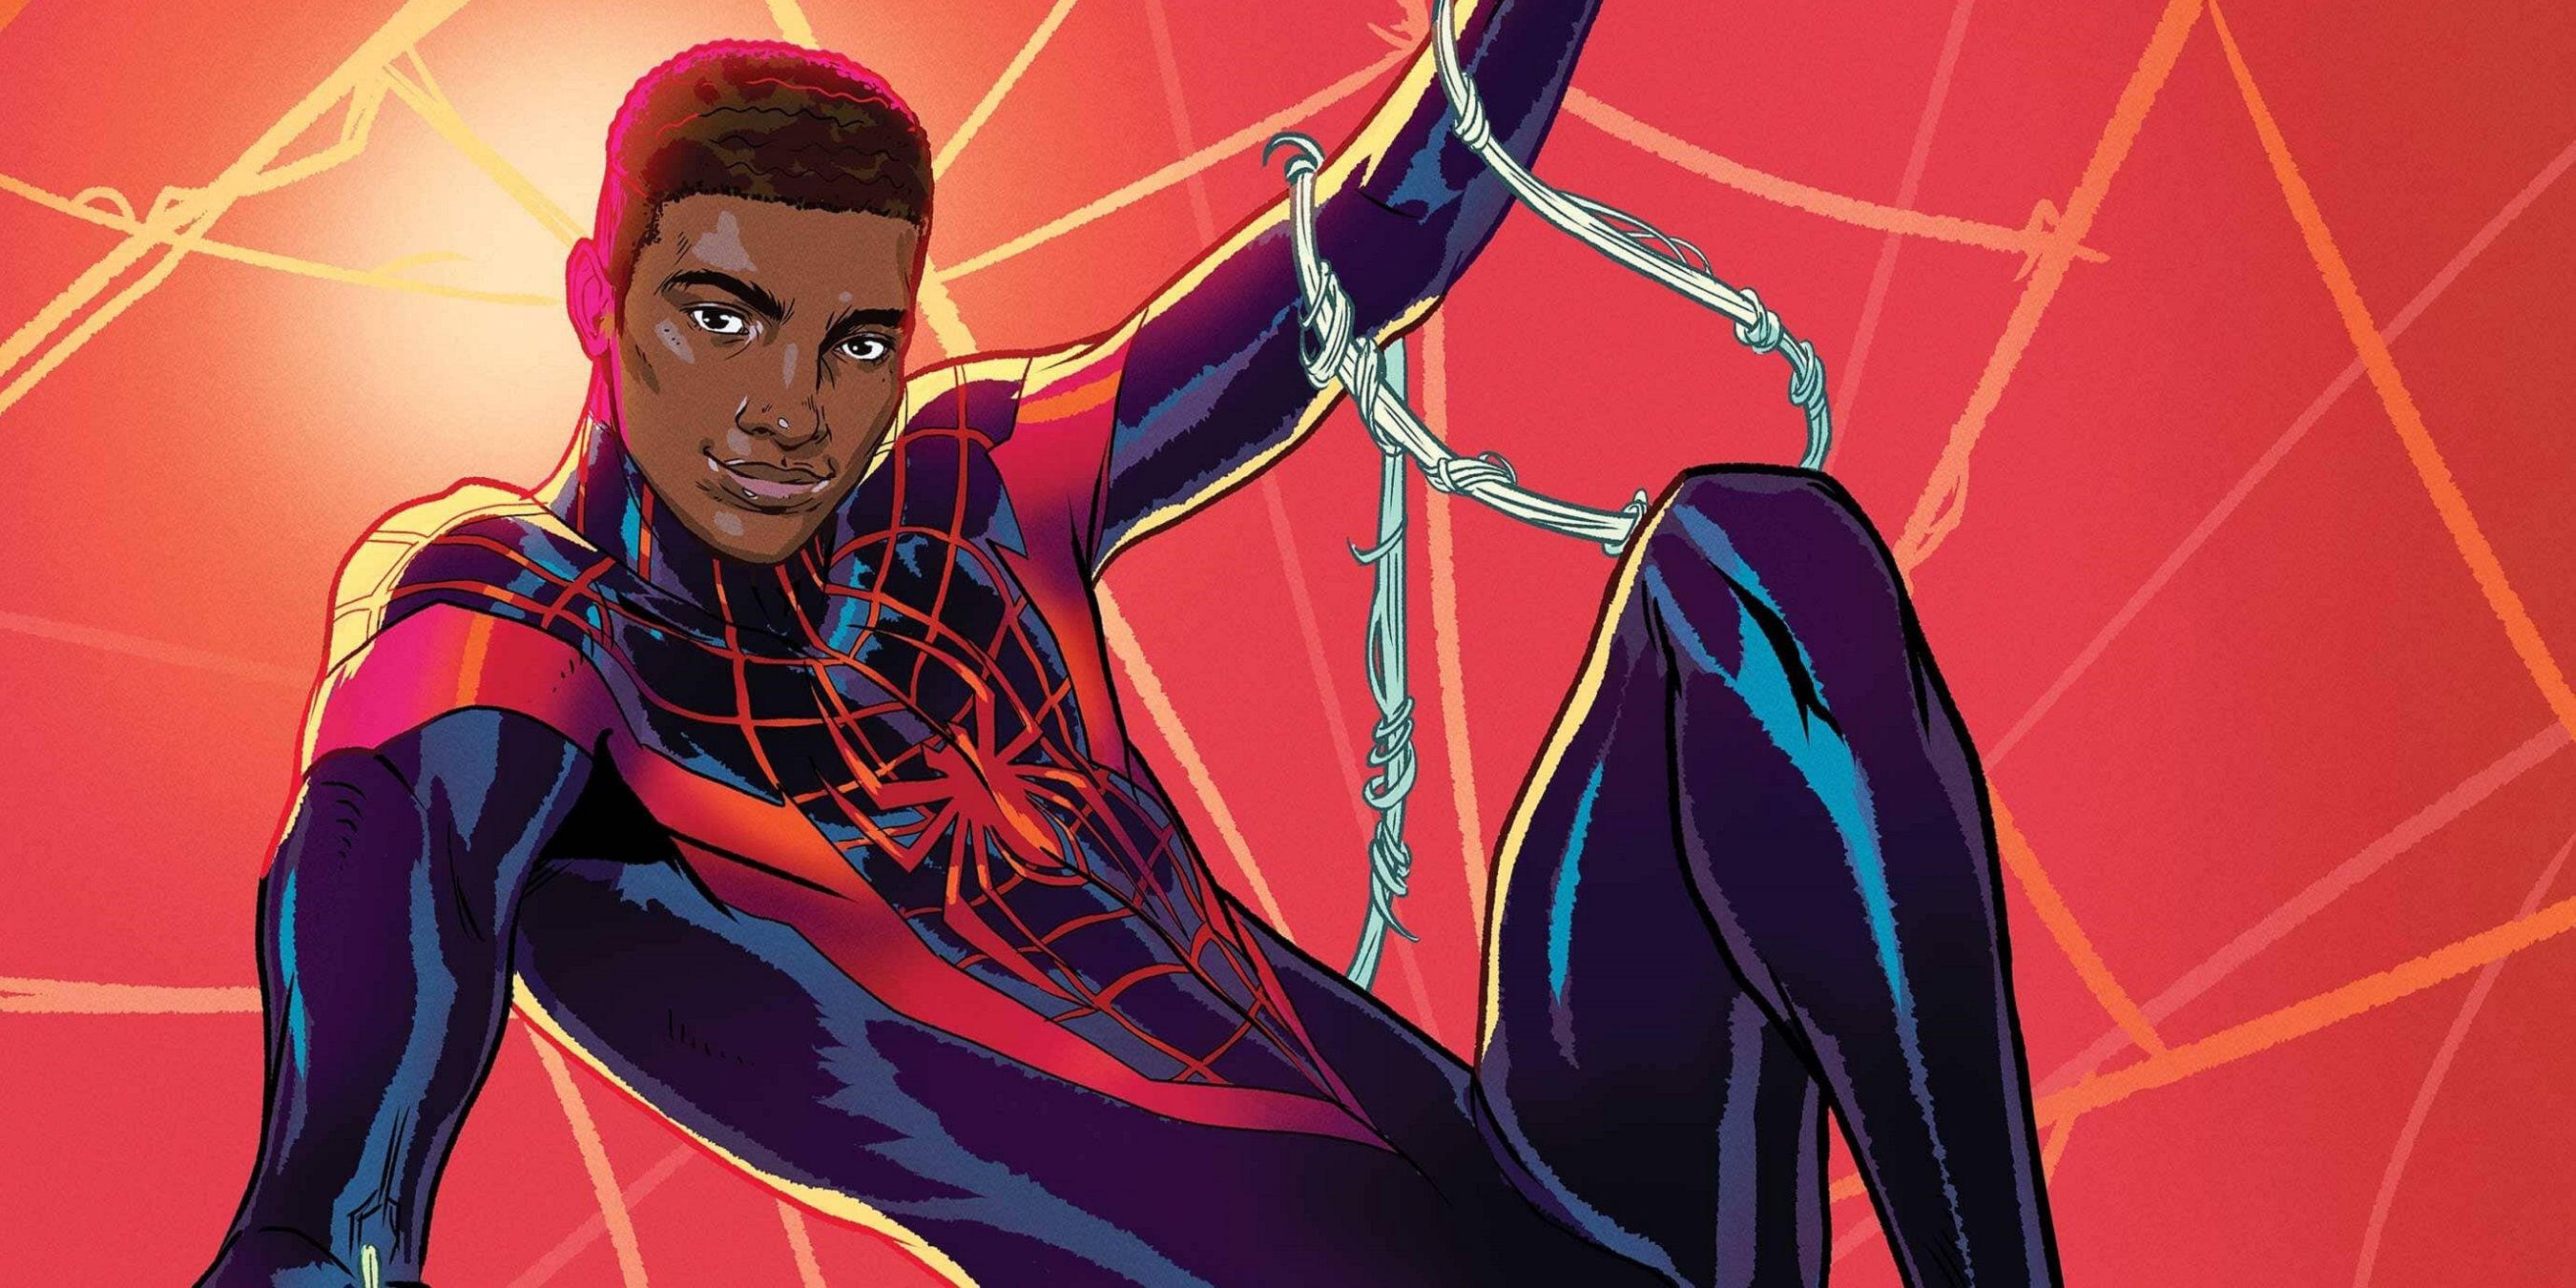 Miles Morales with his mask off in the comics.